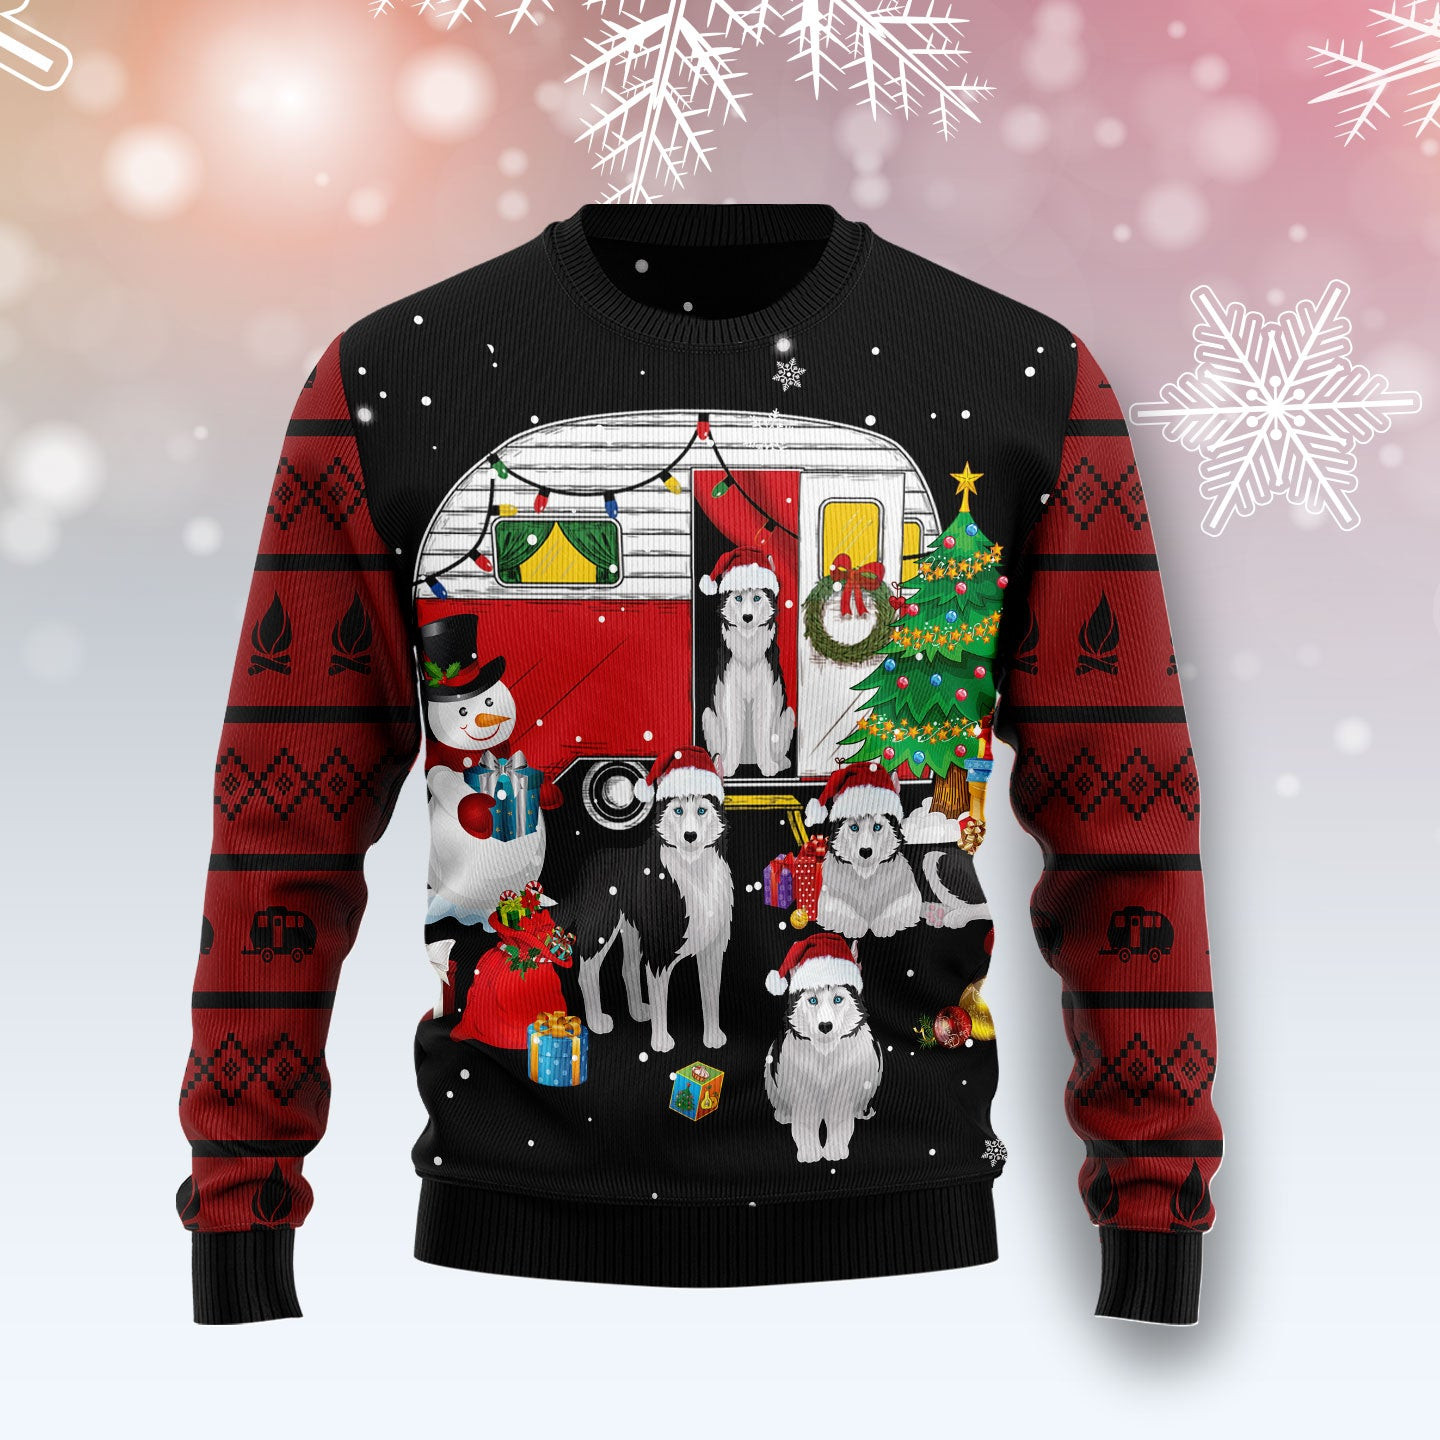 Camping Car And Siberian Husky Ugly Christmas Sweater, Ugly Sweater For Men Women, Holiday Sweater